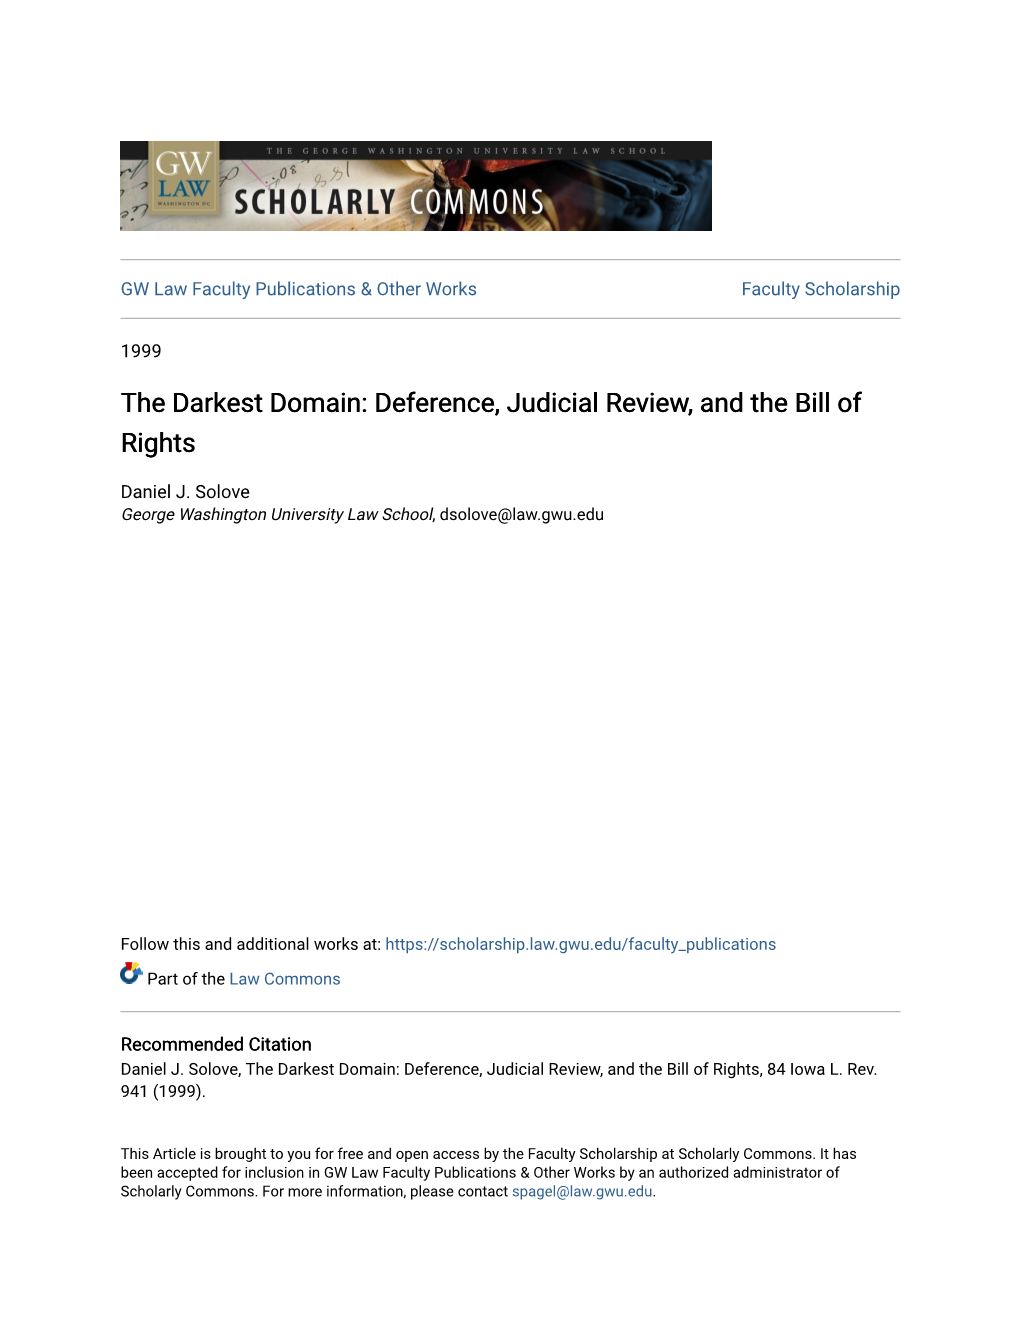 The Darkest Domain: Deference, Judicial Review, and the Bill of Rights